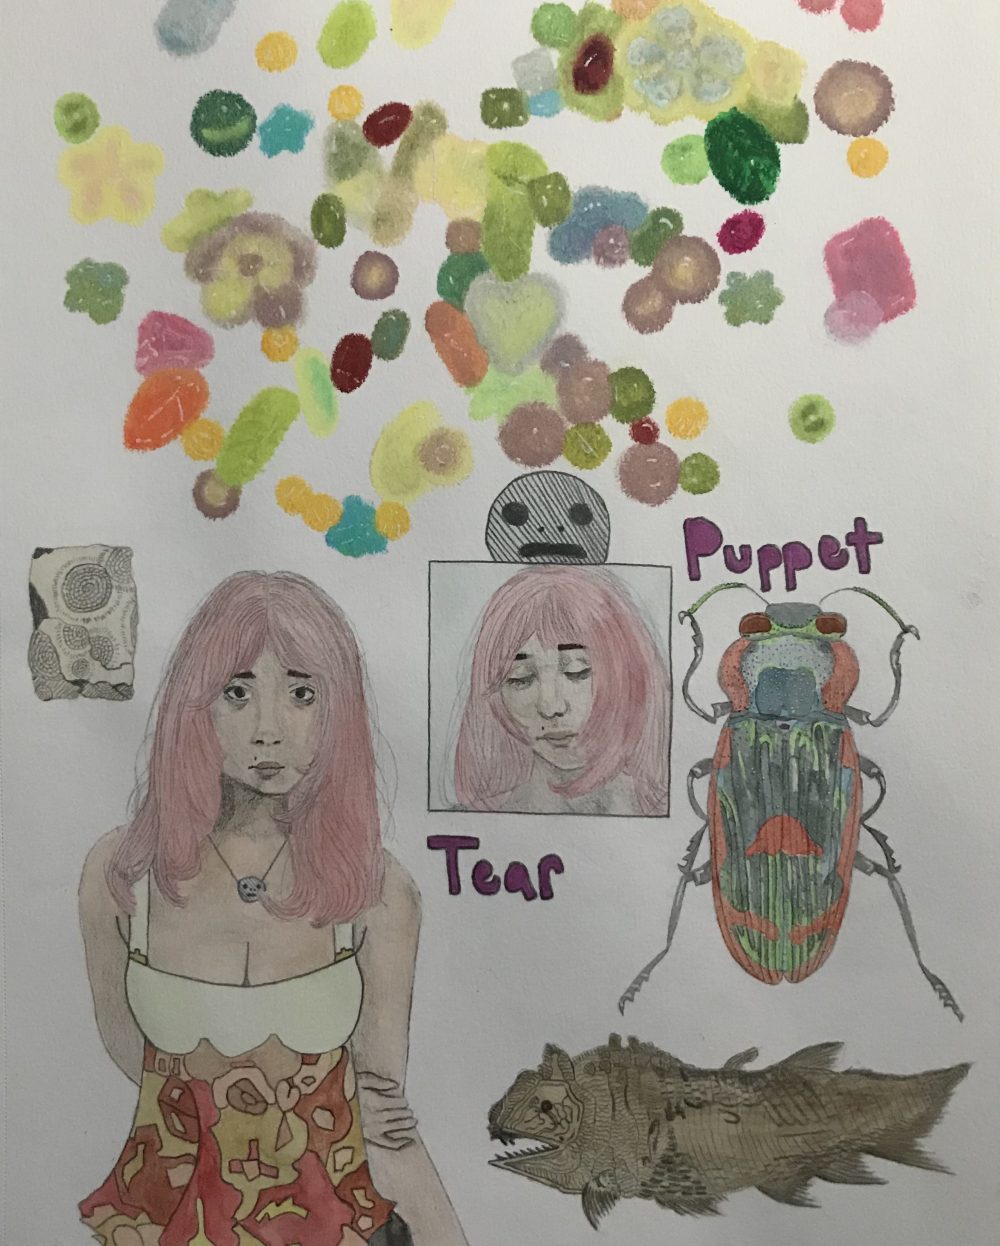 Scattered colorful gems take up the first third of the page, below them is a woman with a concerned look, the words "Puppet" and "Tear", a large colorful beetle, and a fossilized fish.